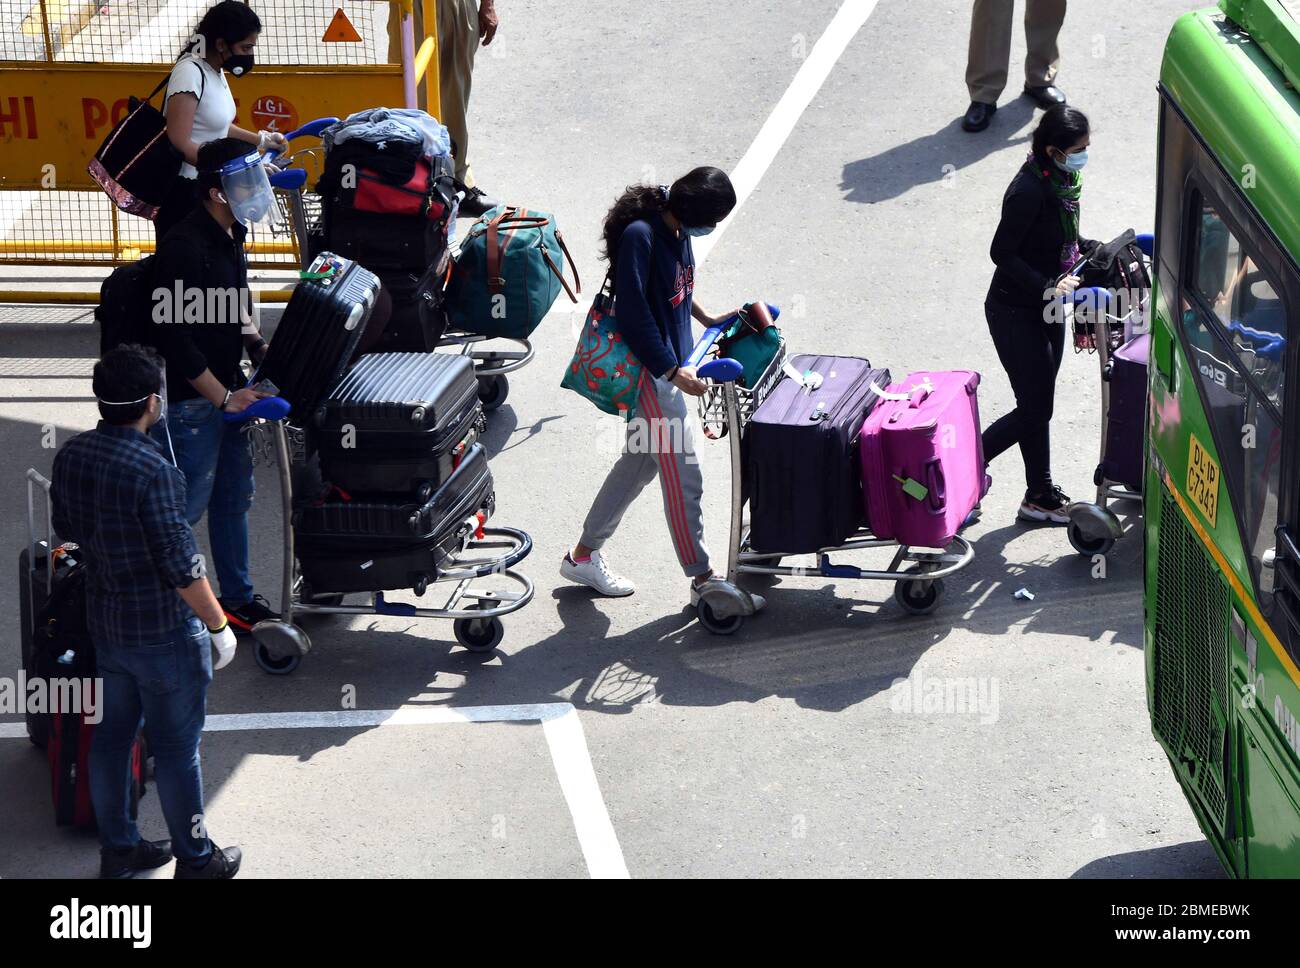 India, India. 8th May, 2020. Stranded Indians arriving from Singapore come out of an airport in New Delhi, India, on May 8, 2020. The flights bringing back stranded Indians from abroad have begun to arrive in India, officials said Friday. Credit: Partha Sarkar/Xinhua/Alamy Live News Stock Photo